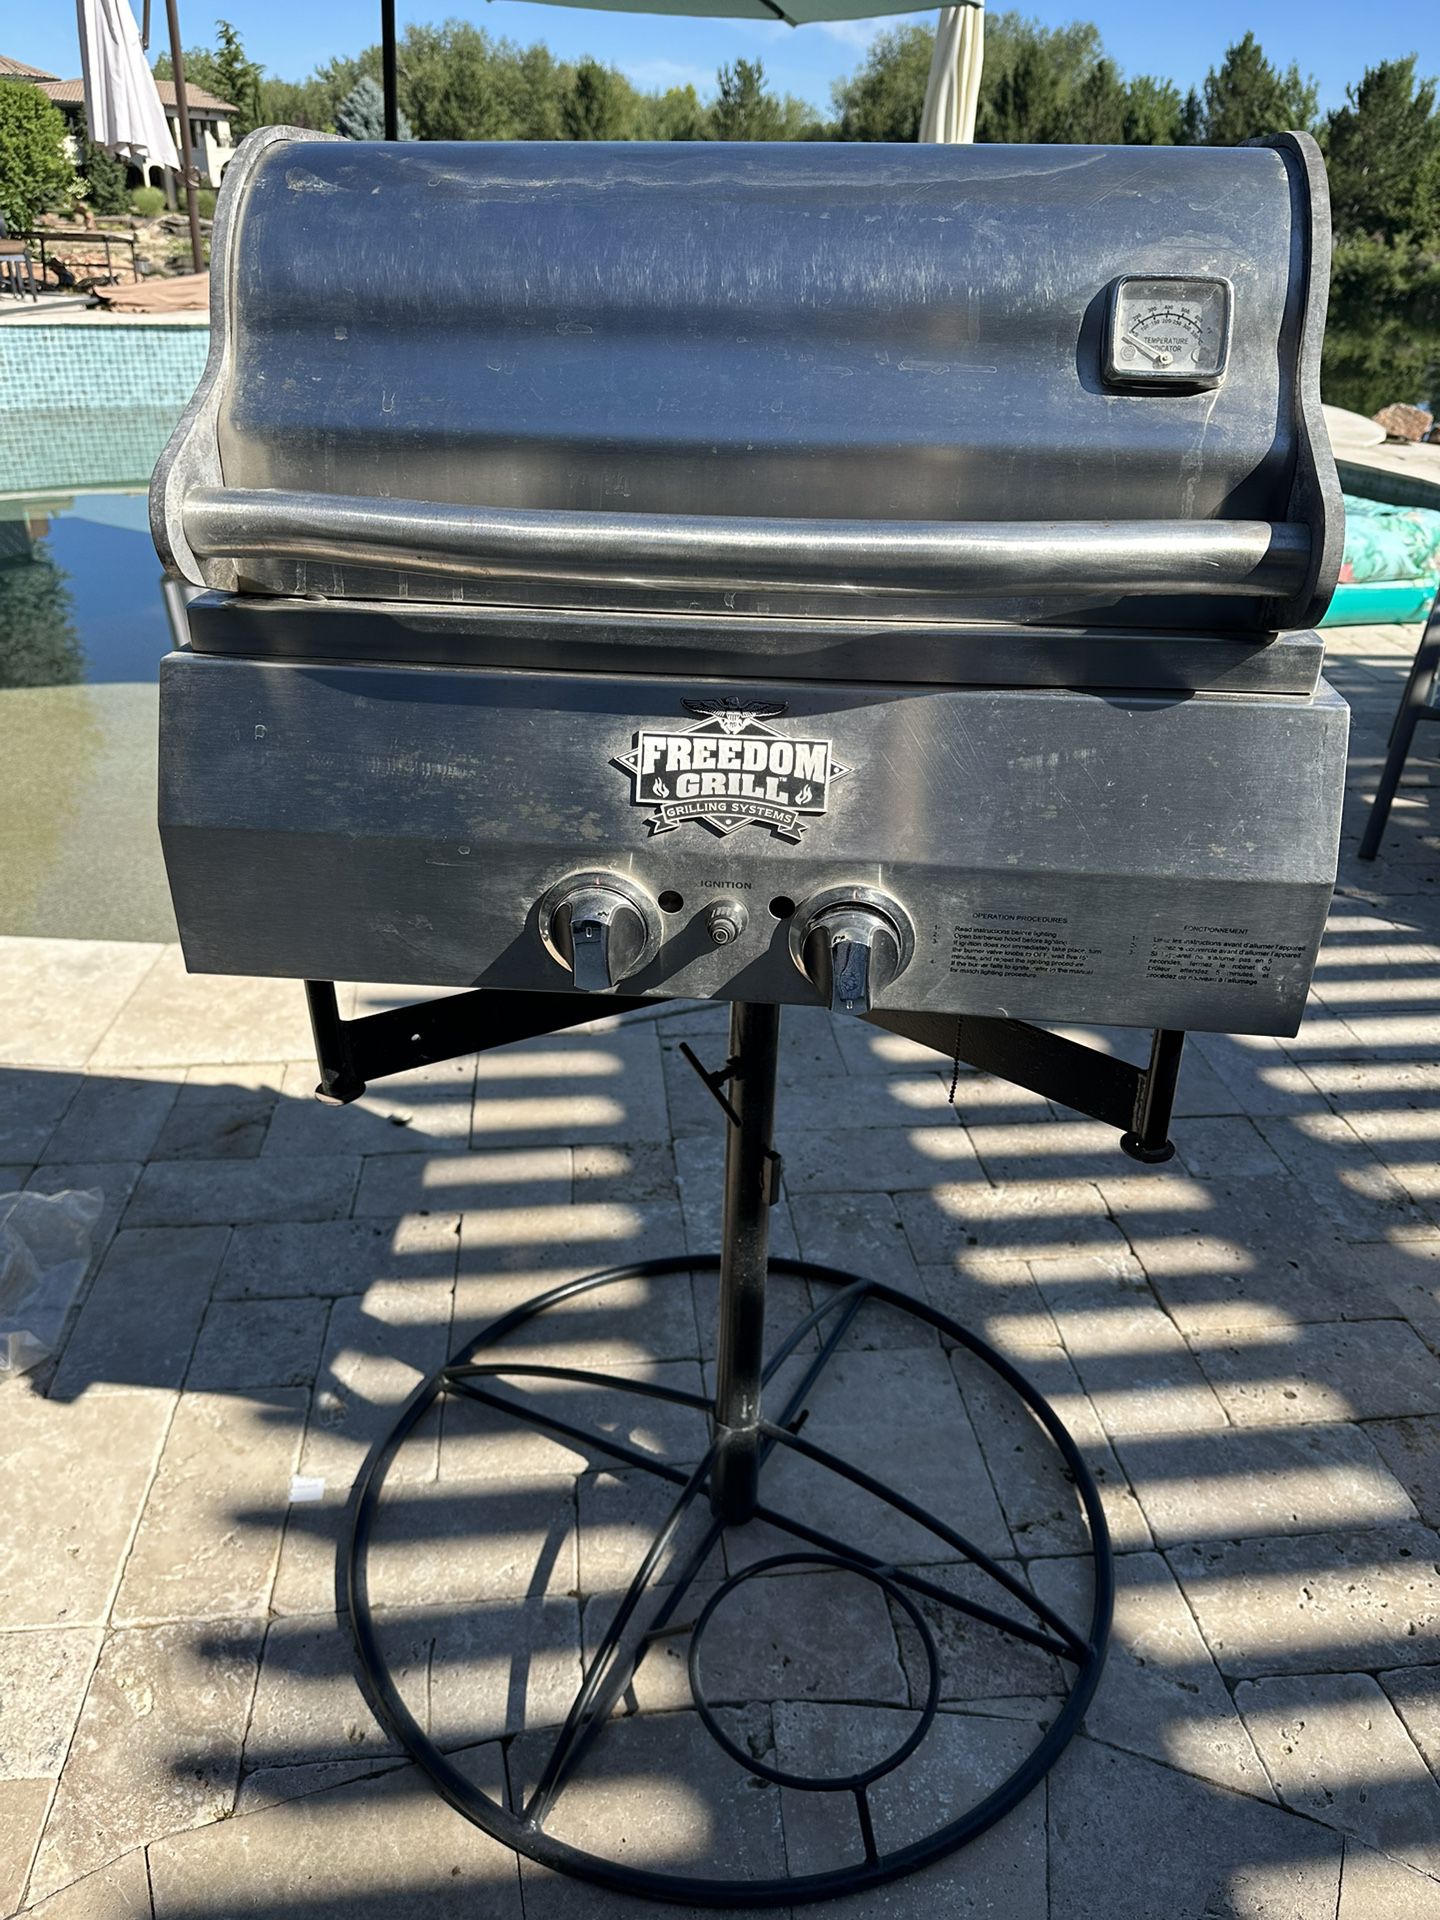 melodisk hele Søgemaskine markedsføring Freedom Grill Model FG 100 With Stand for Sale in Eagle, ID - OfferUp